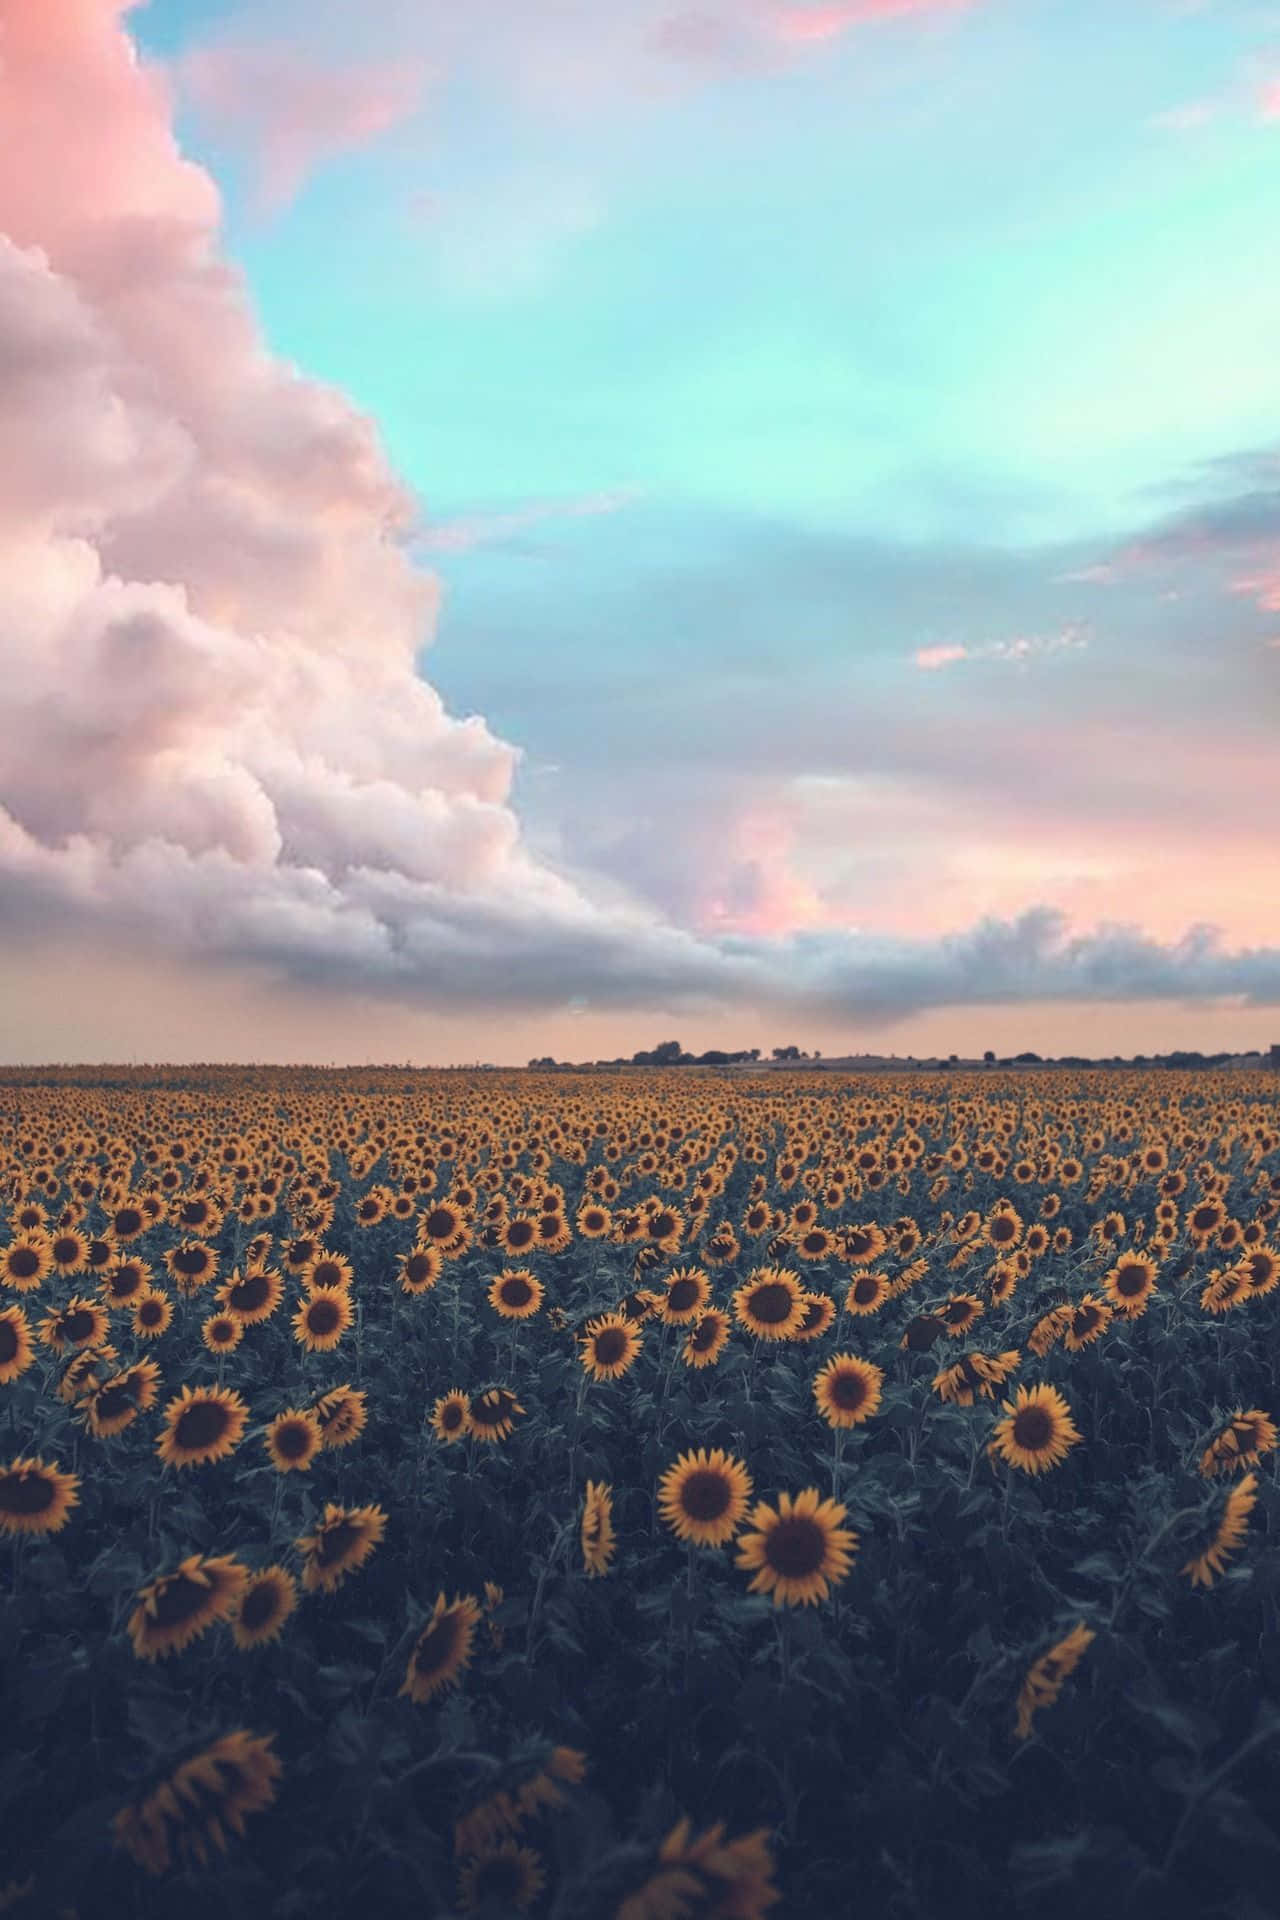 Aesthetic Nature With A Sunflower Field Background